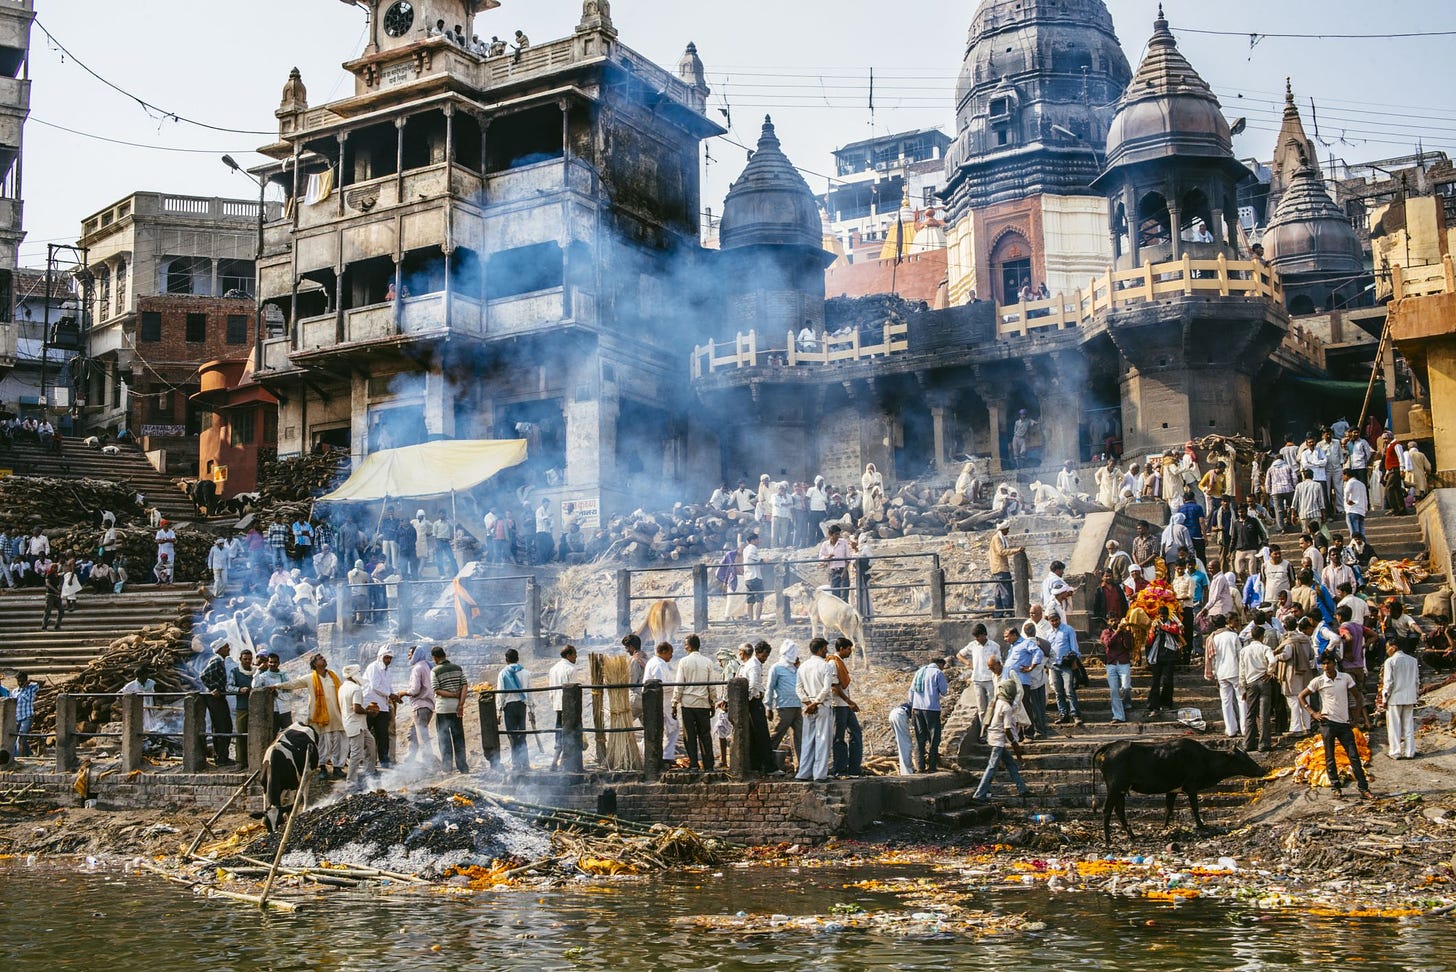 9 Important Ghats in Varanasi that You Must See